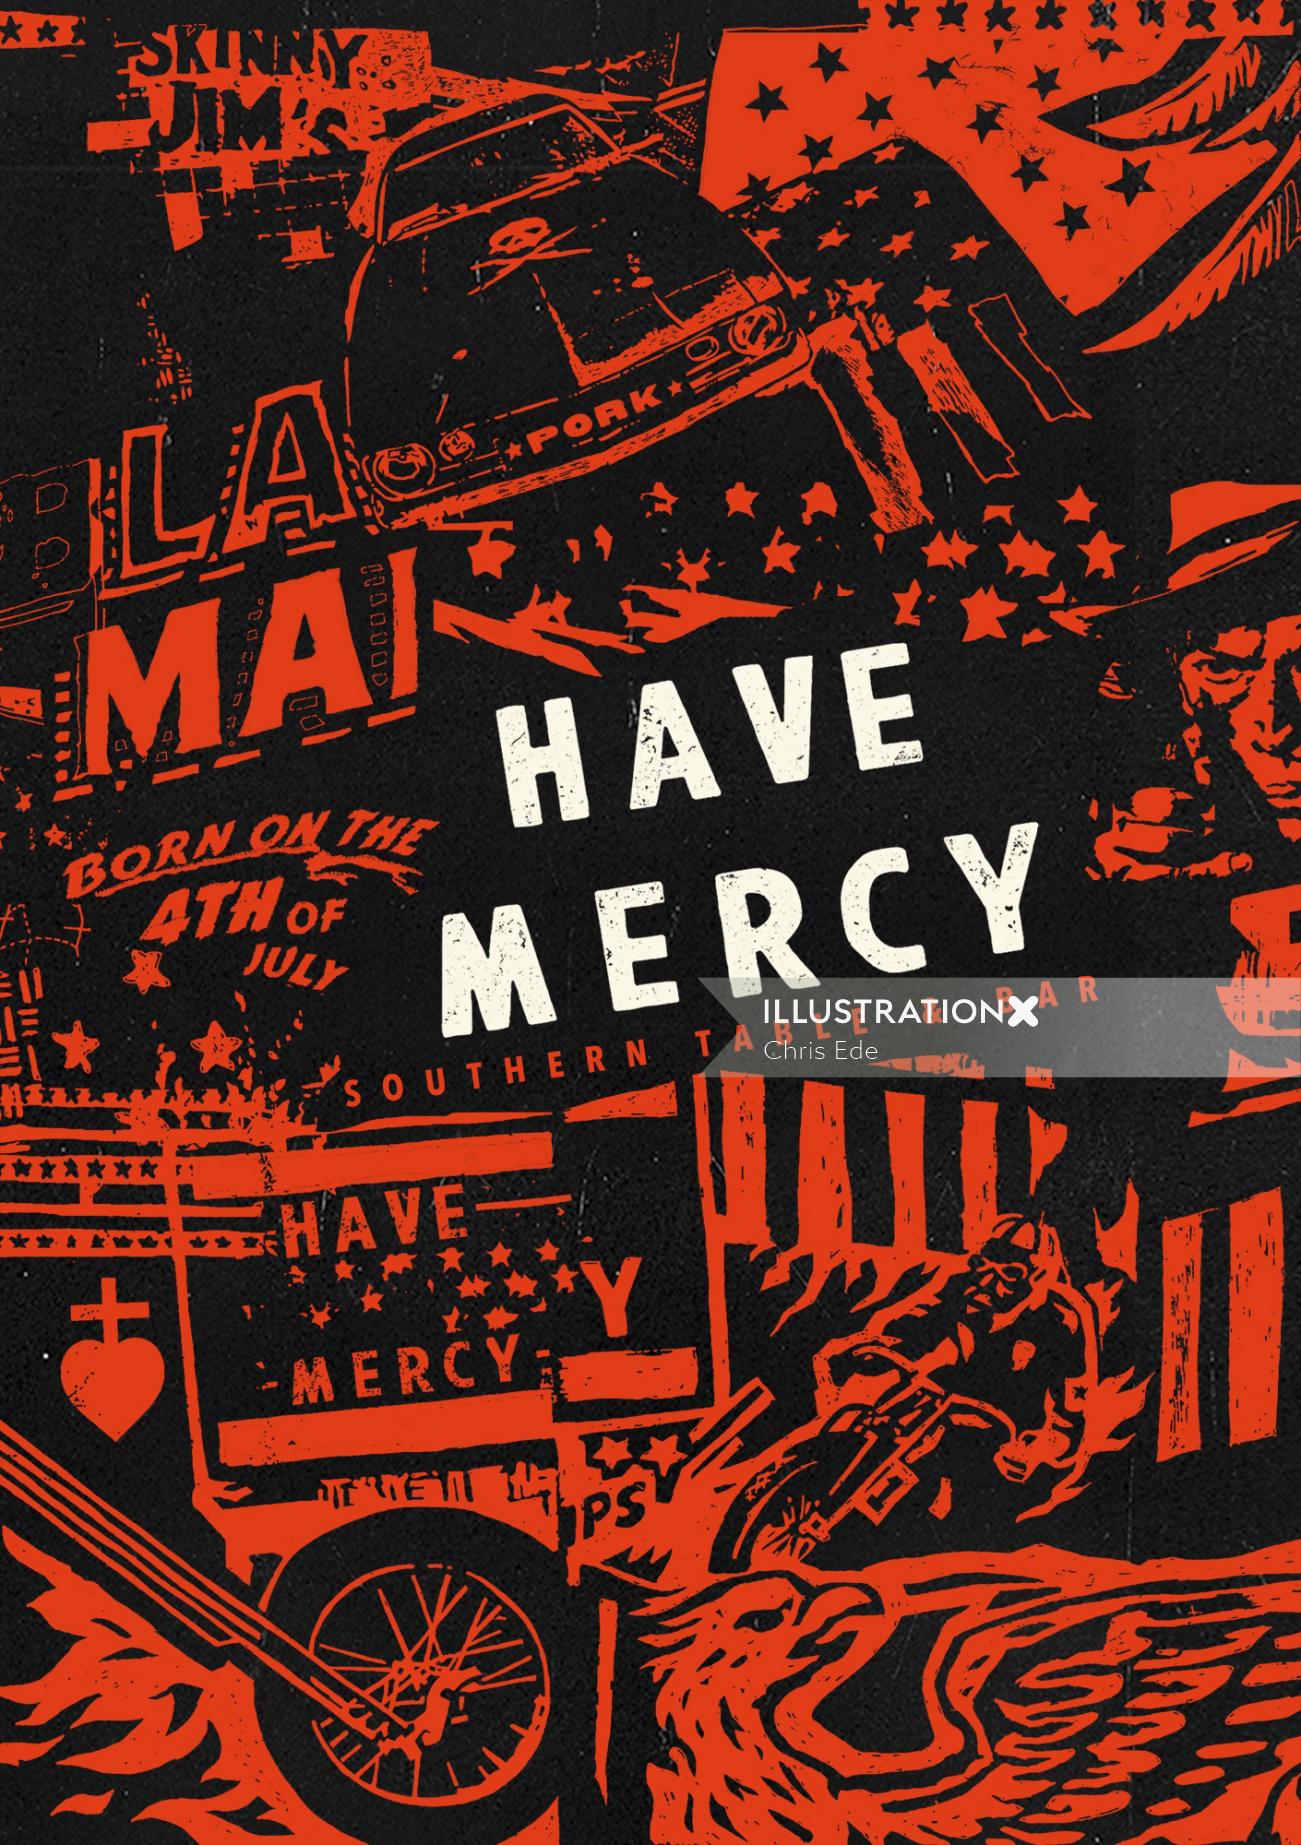 Have Mercy Mural Illustration